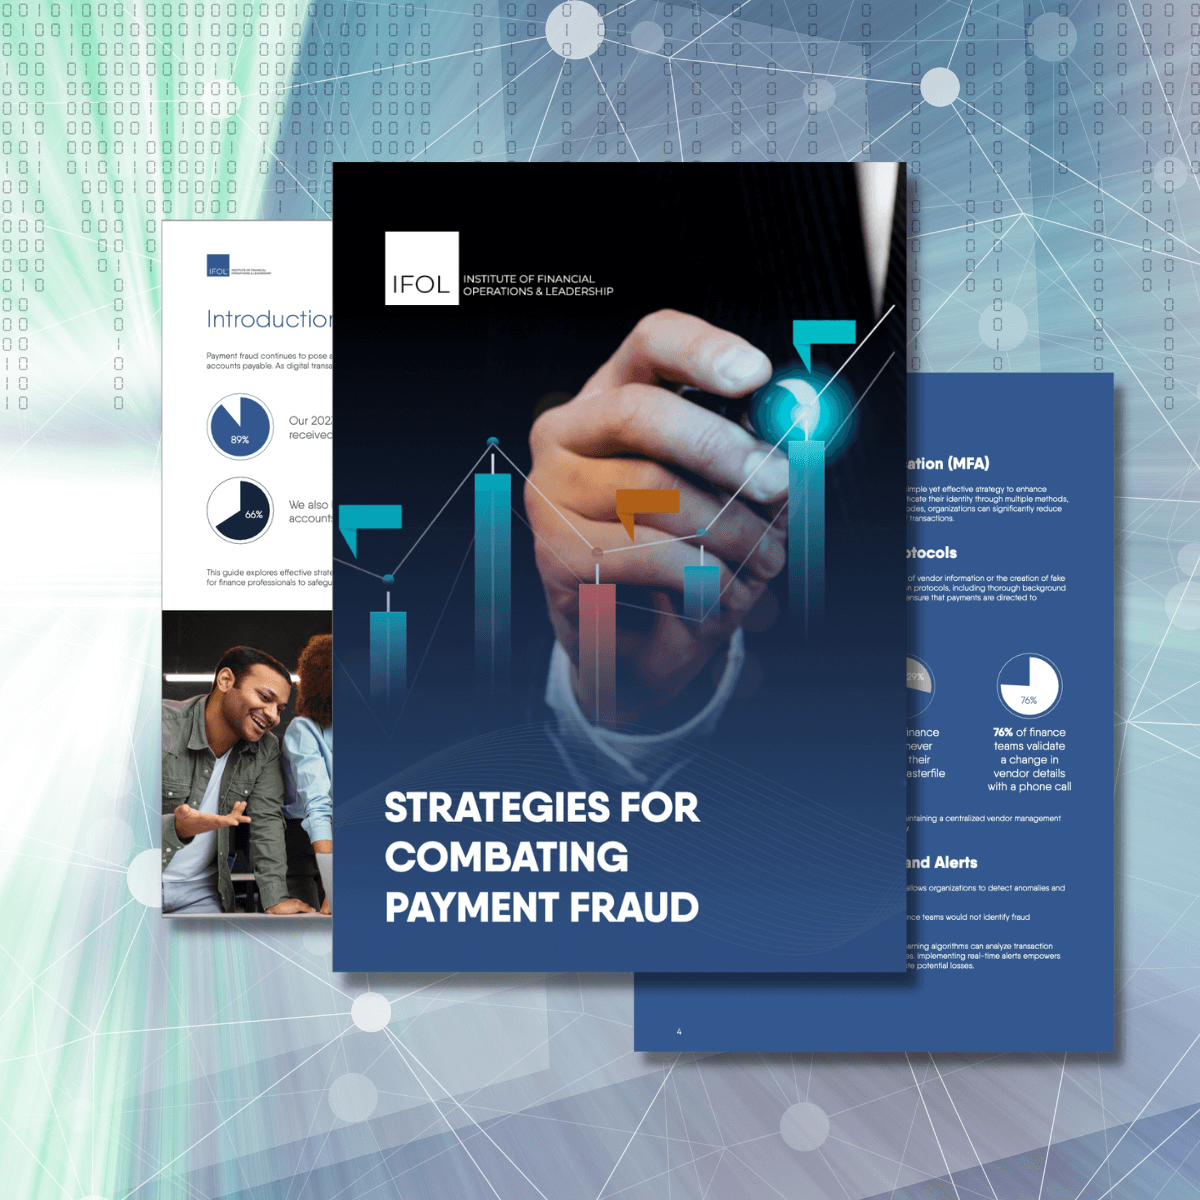 Strategies for Combating Payment Fraud